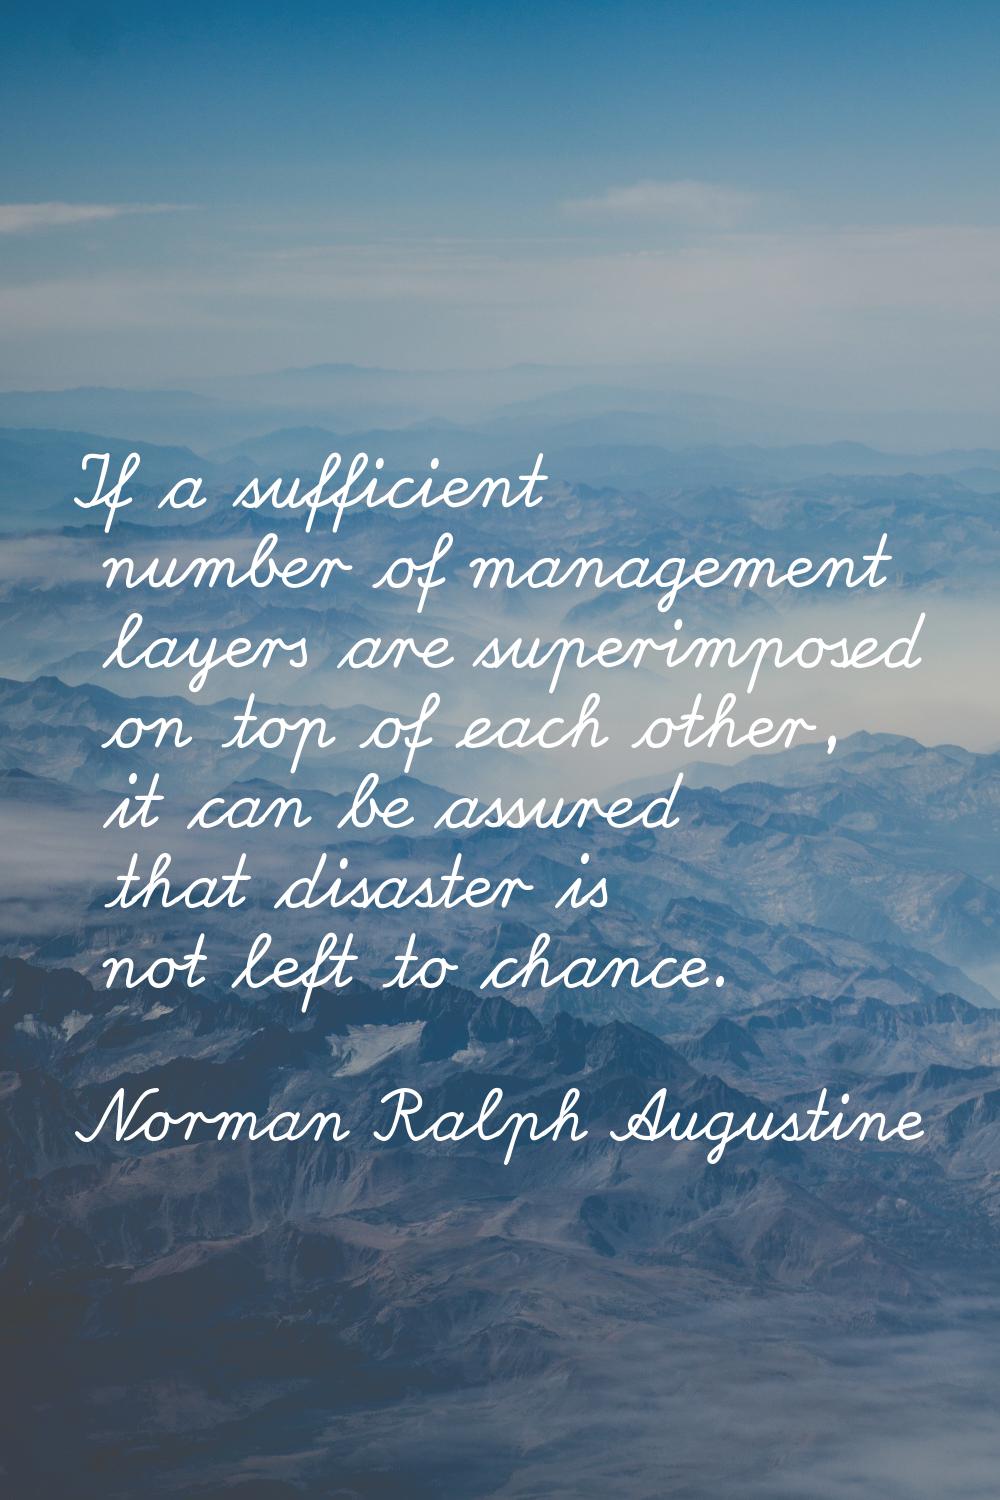 If a sufficient number of management layers are superimposed on top of each other, it can be assure